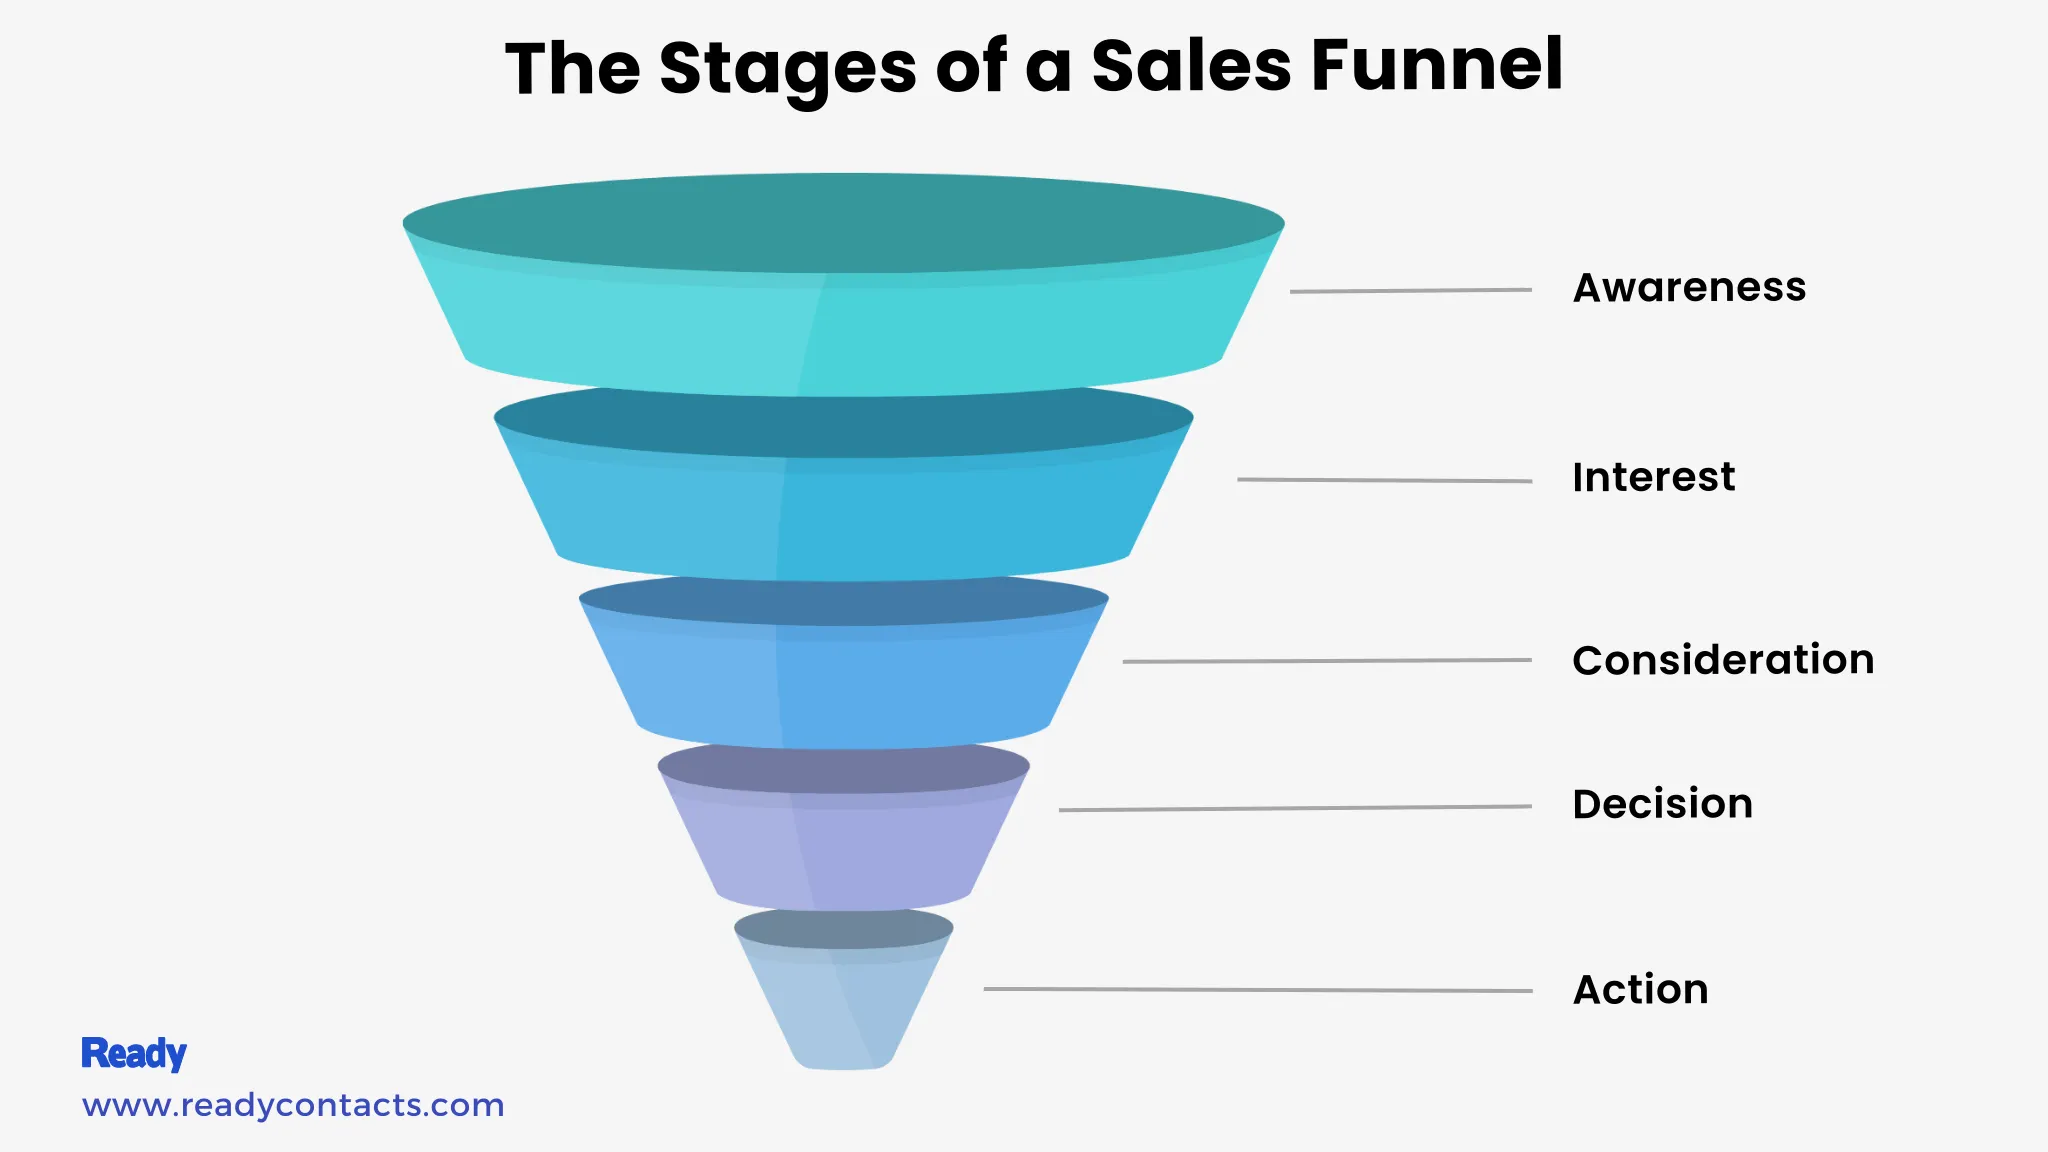 What is a sales funnel in simple terms?